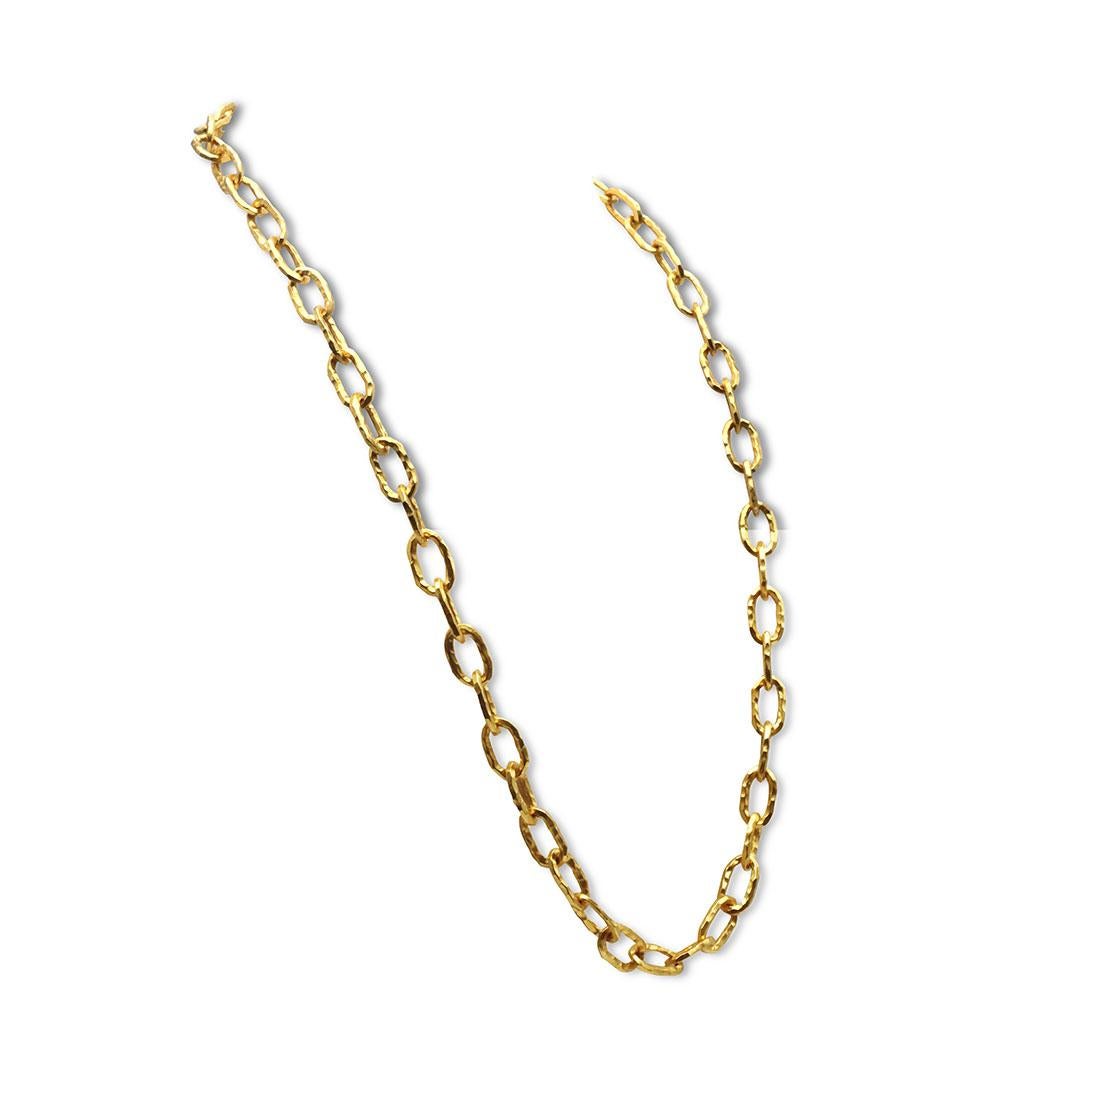 Authentic Jean Mahie 'Cadene' necklace crafted in 22 karat yellow gold features 54  hand-hammered oval links. This eye-catching chain is adjustable and includes a separate 5 inch extension. Excluding the extension, the necklace measures 28 inches